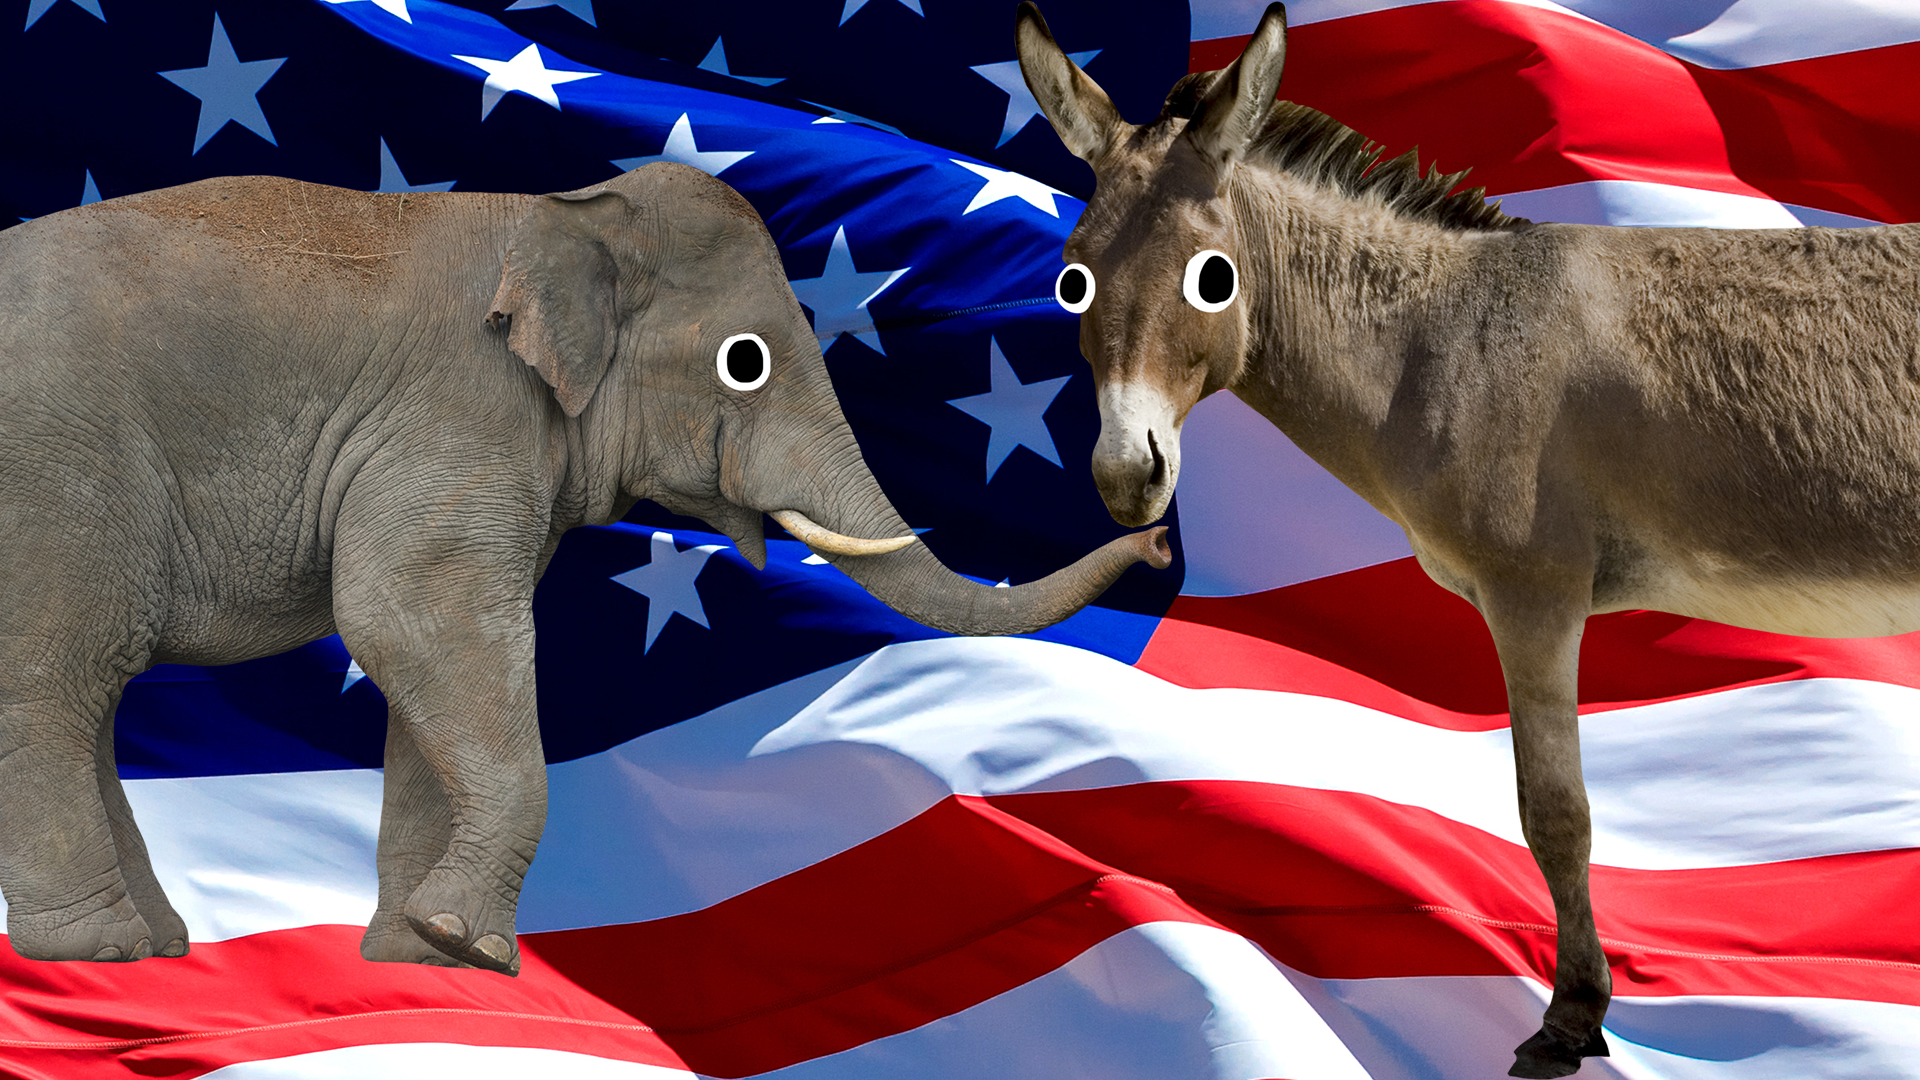 An elephant and a donkey in front of the USA flag